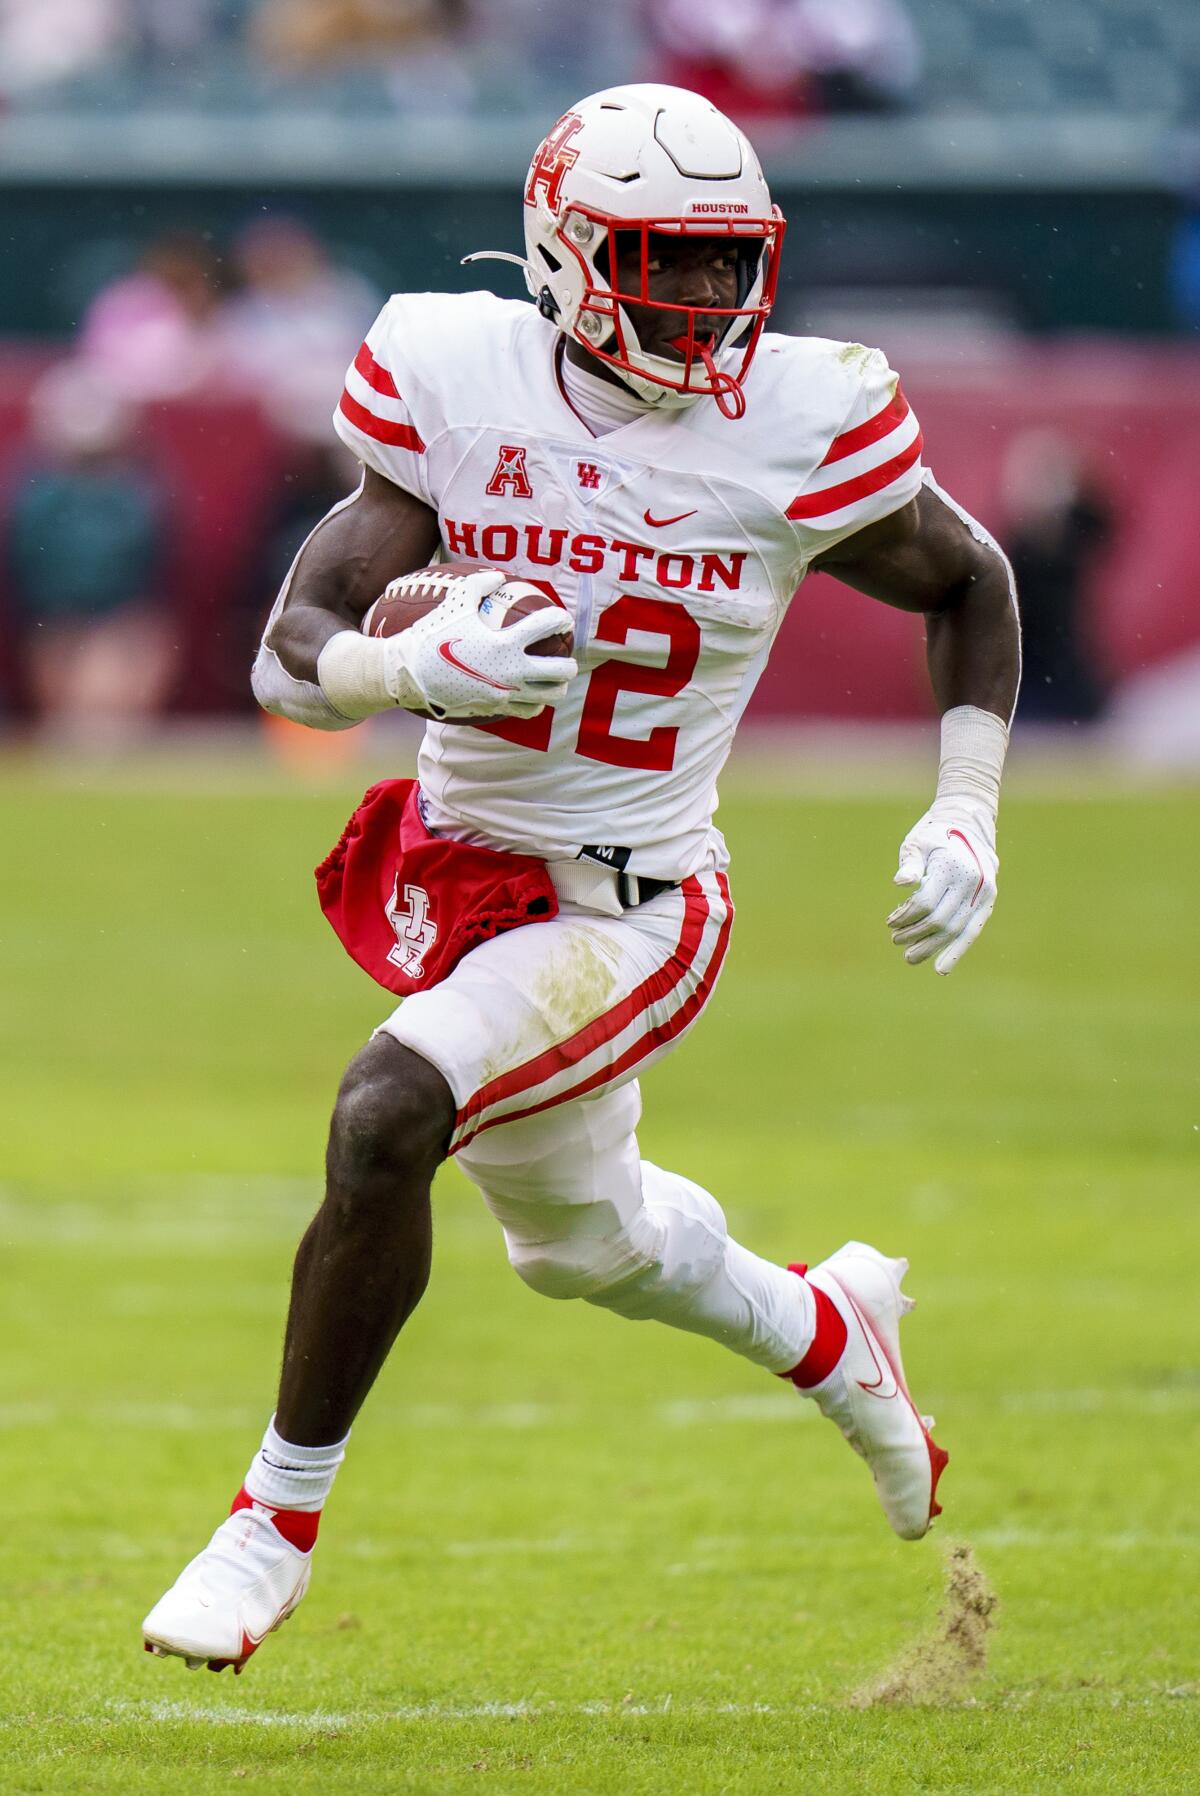 Houston running back Alton McCaskill (22) runs with the ball during the first half of an NCAA college football against Temple, Saturday, Nov. 13, 2021, in Philadelphia. (AP Photo/Chris Szagola)